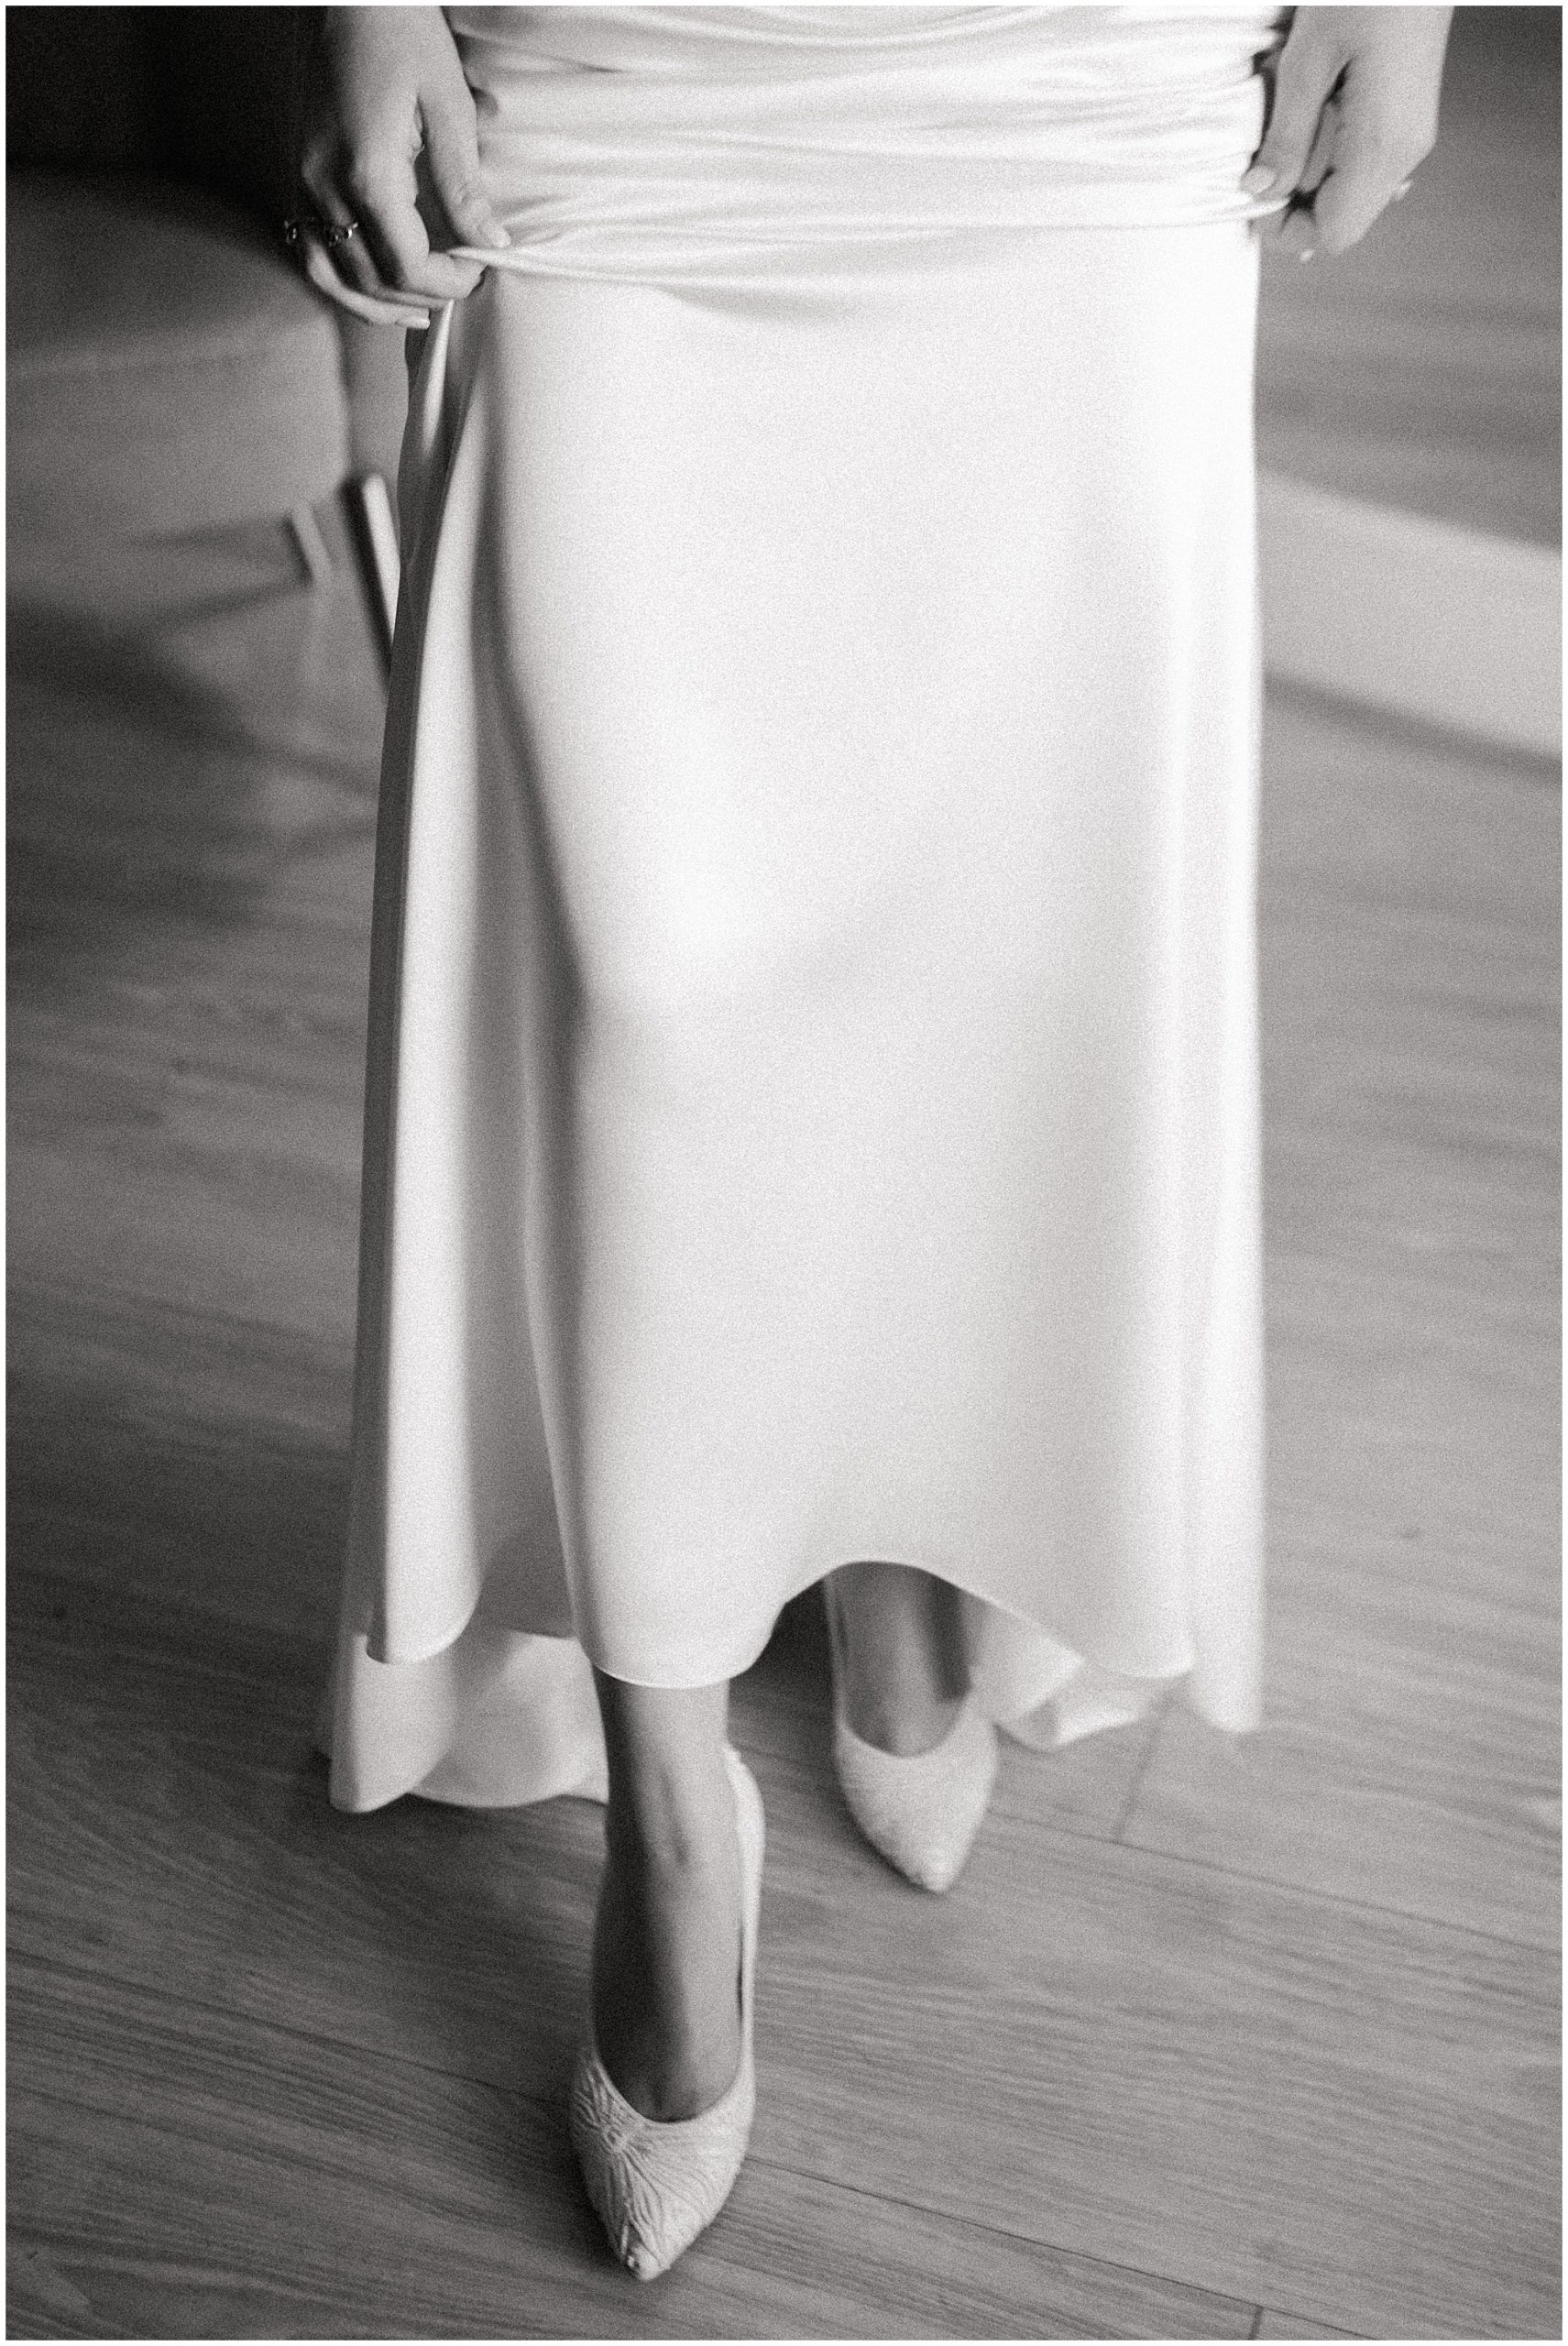 Sleek Wedding Gown in Black and White photography